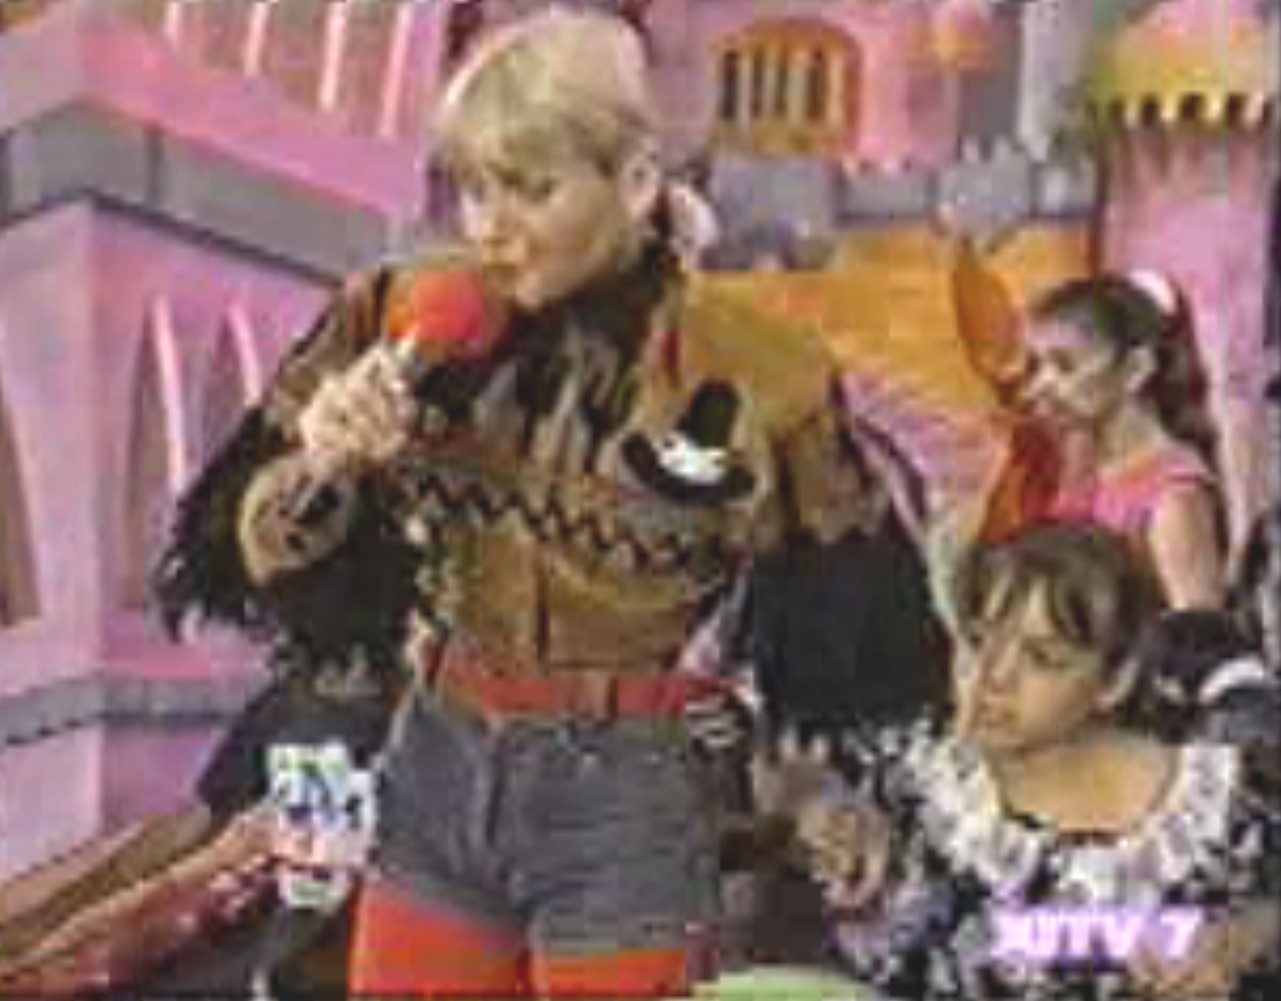 XITV CHANNEL 37 XUXA's Search Party!